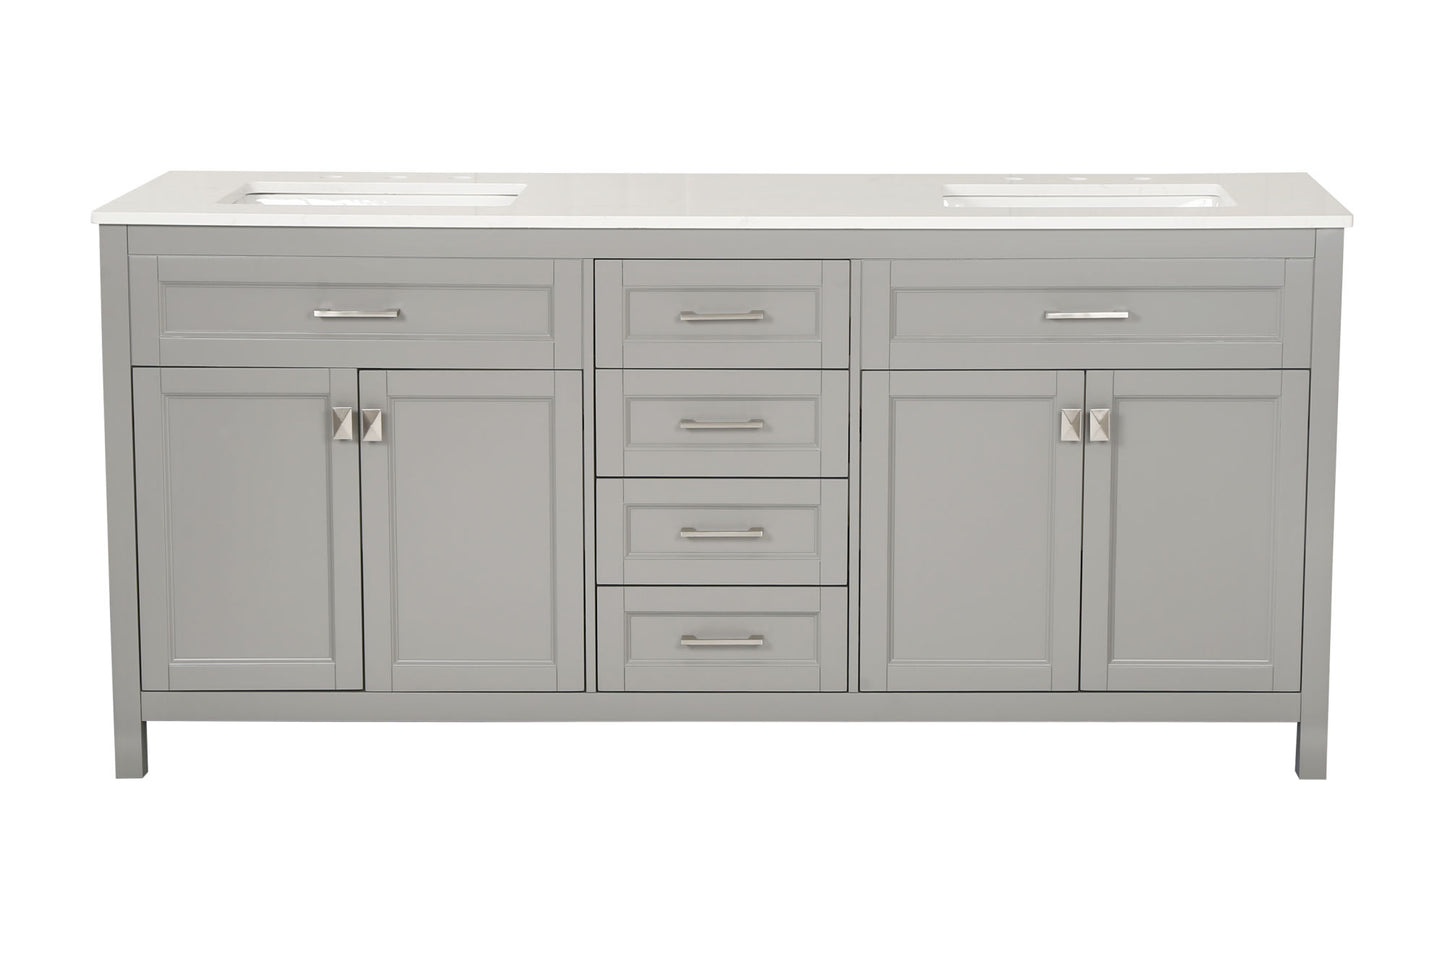 Vanity Sink Combo featuring a Marble Countertop, Bathroom Sink Cabinet, and Home Decor Bathroom Vanities - Fully Assembled White 72-inch Vanity with Sink 23V03-72GR